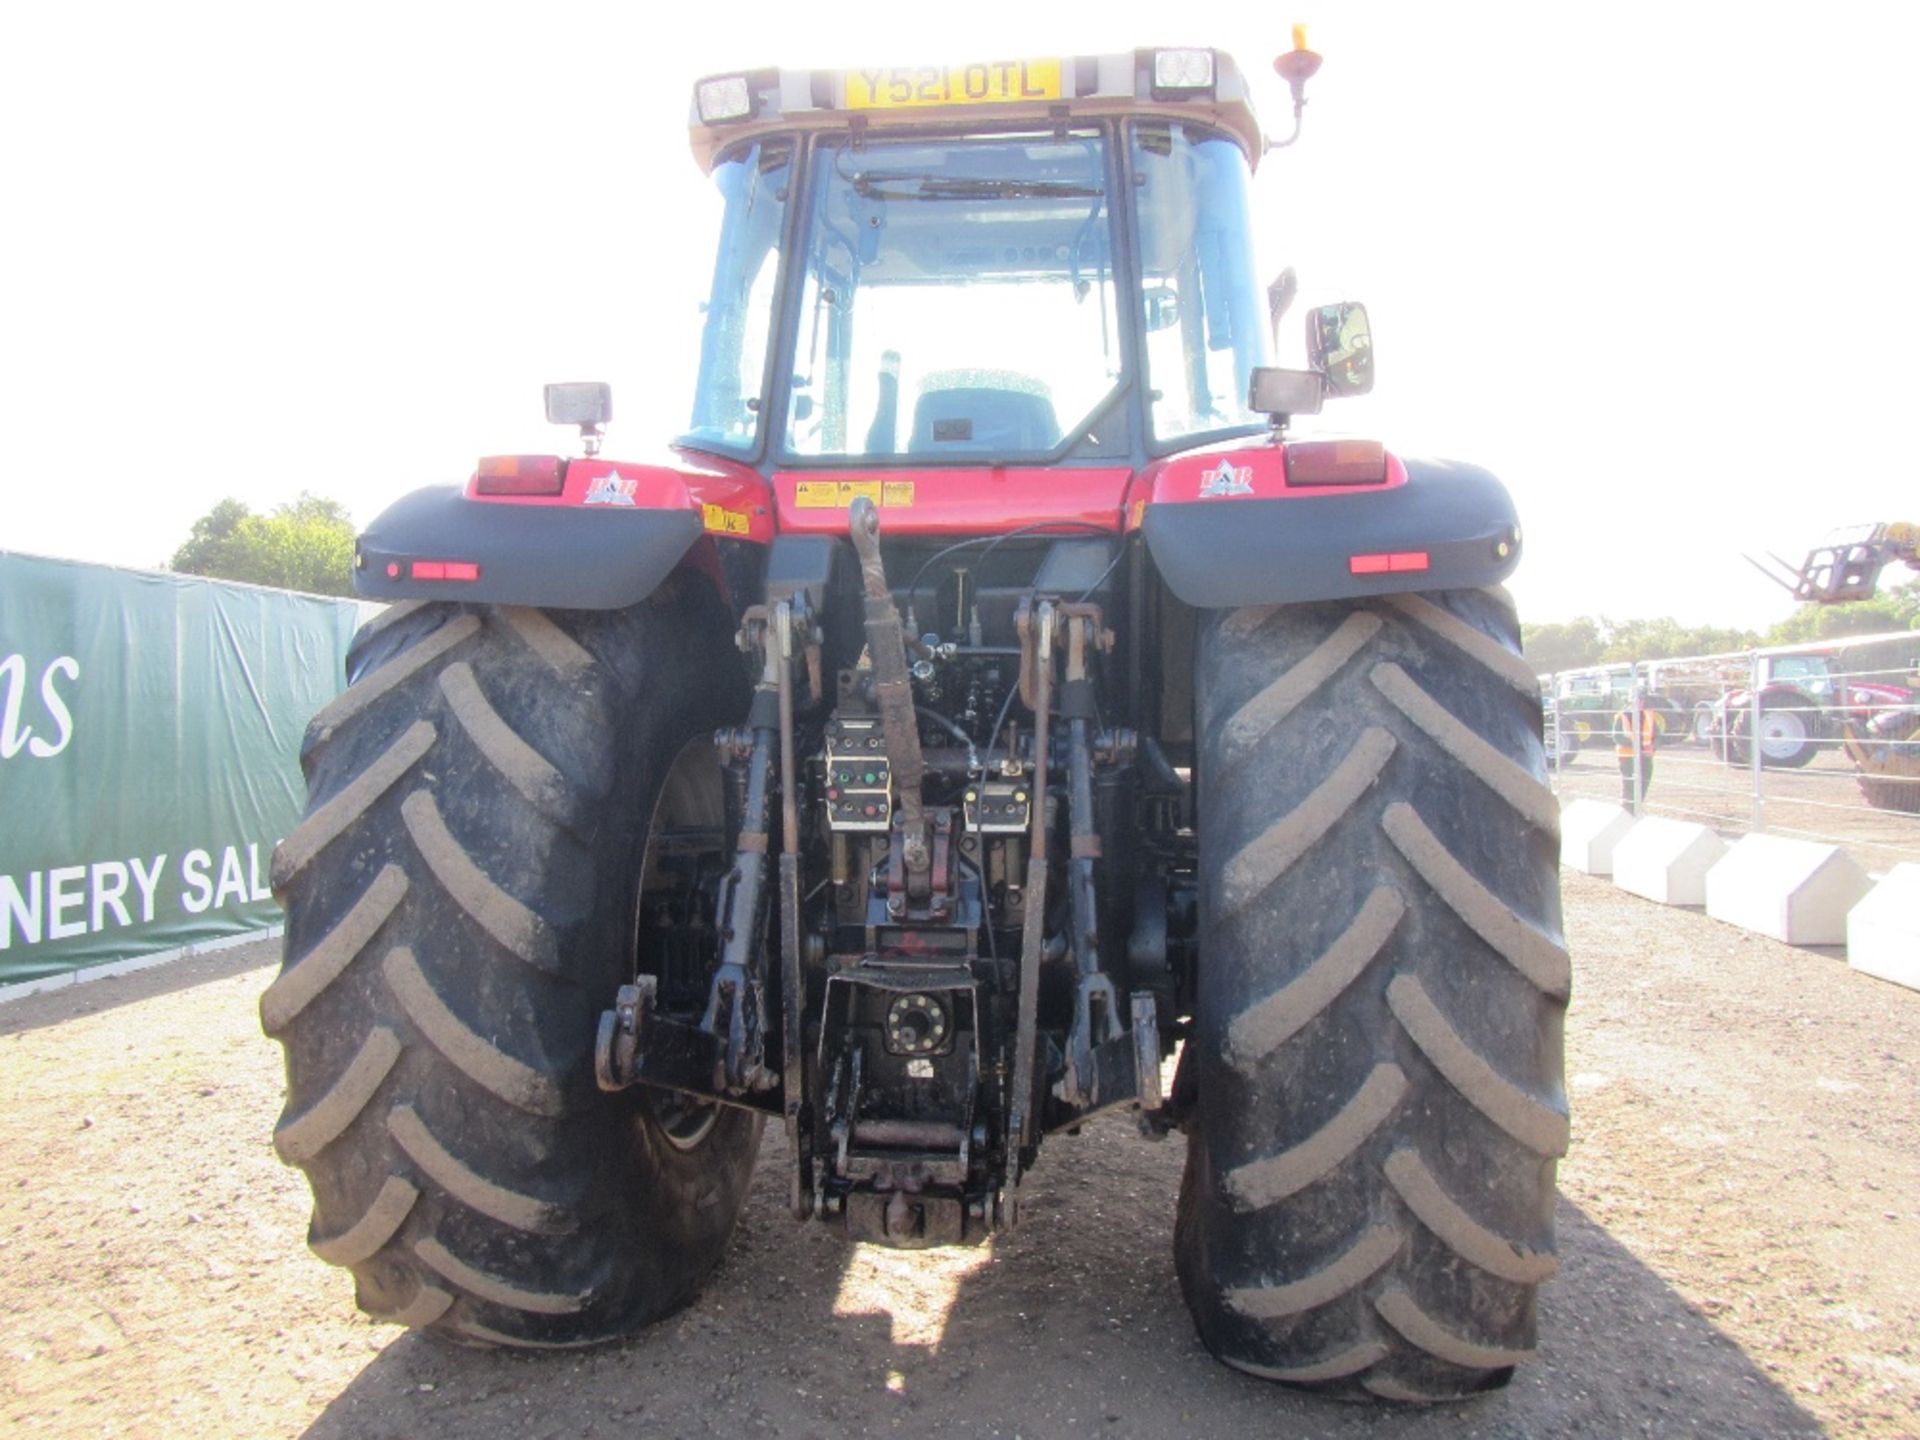 2001 Massey Ferguson 8280 Tractor with Air Con & Pick Up Hitch Reg No Y521 OJL Ser No K179035 - Image 6 of 16